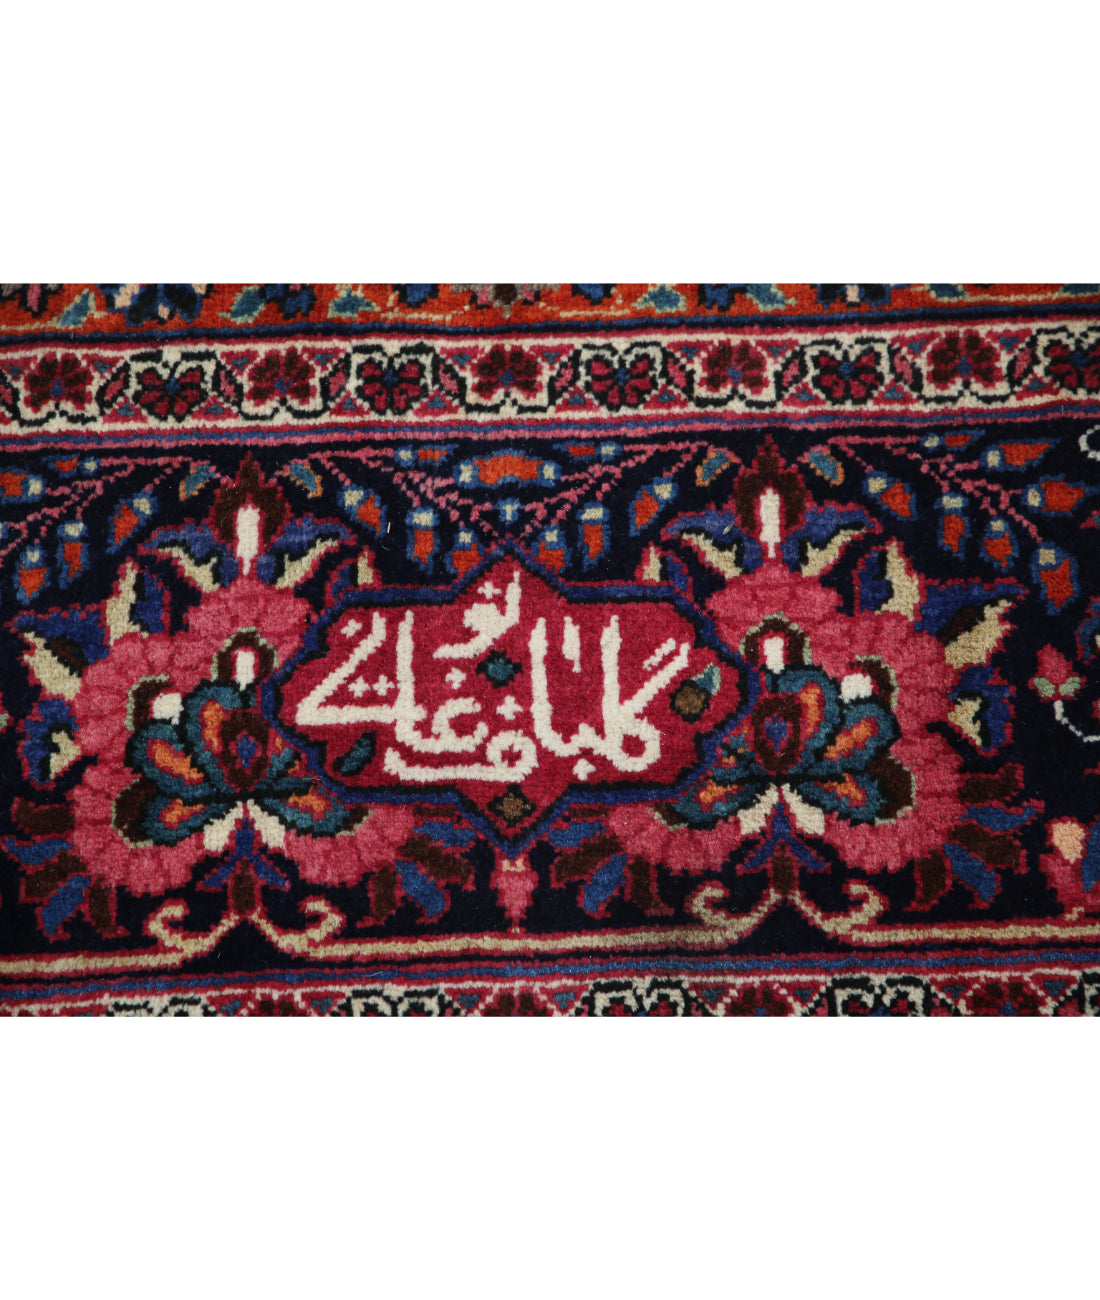 Hand Knotted Persian Mashad Wool Rug - 9'11'' x 13'2'' 9'11'' x 13'2'' (298 X 395) / Red / Blue